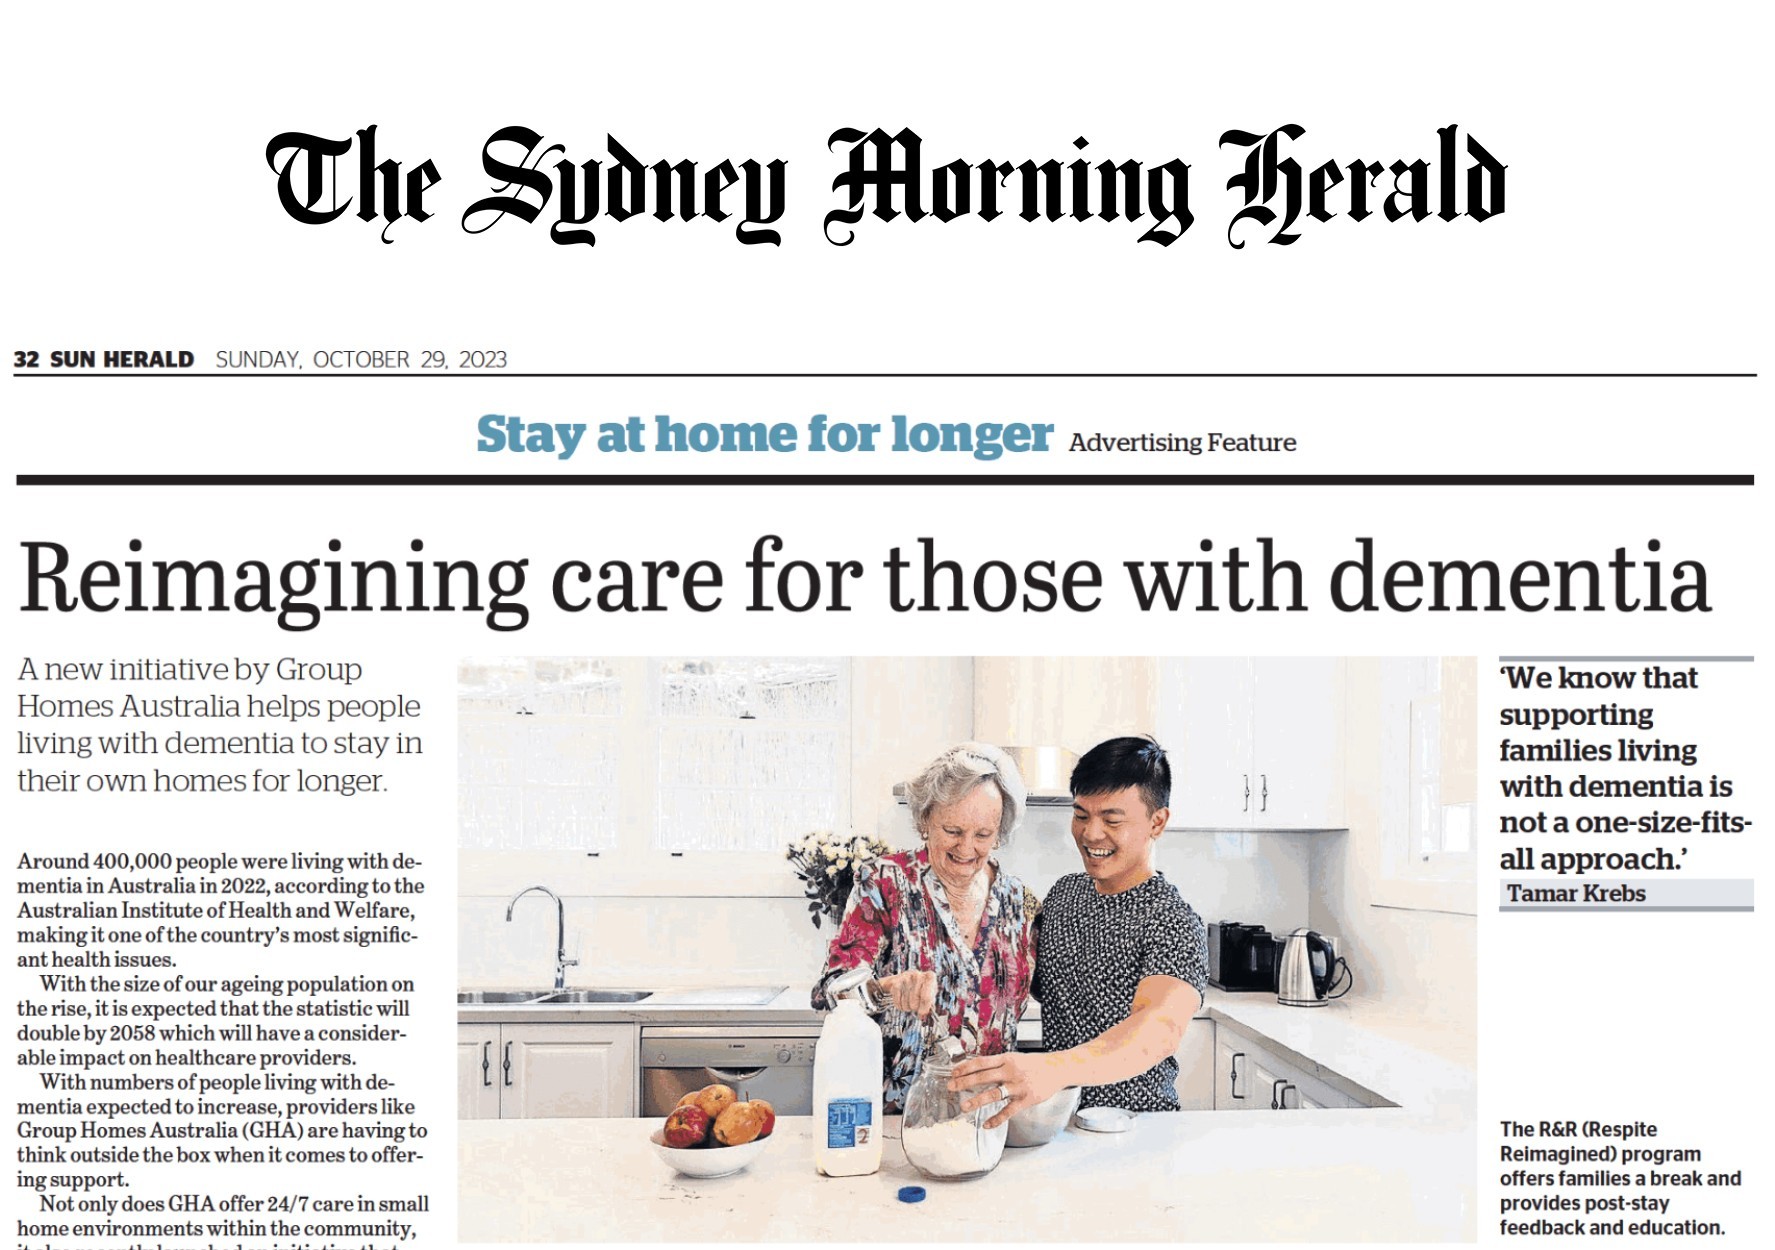 Reimagining care for those with dementia